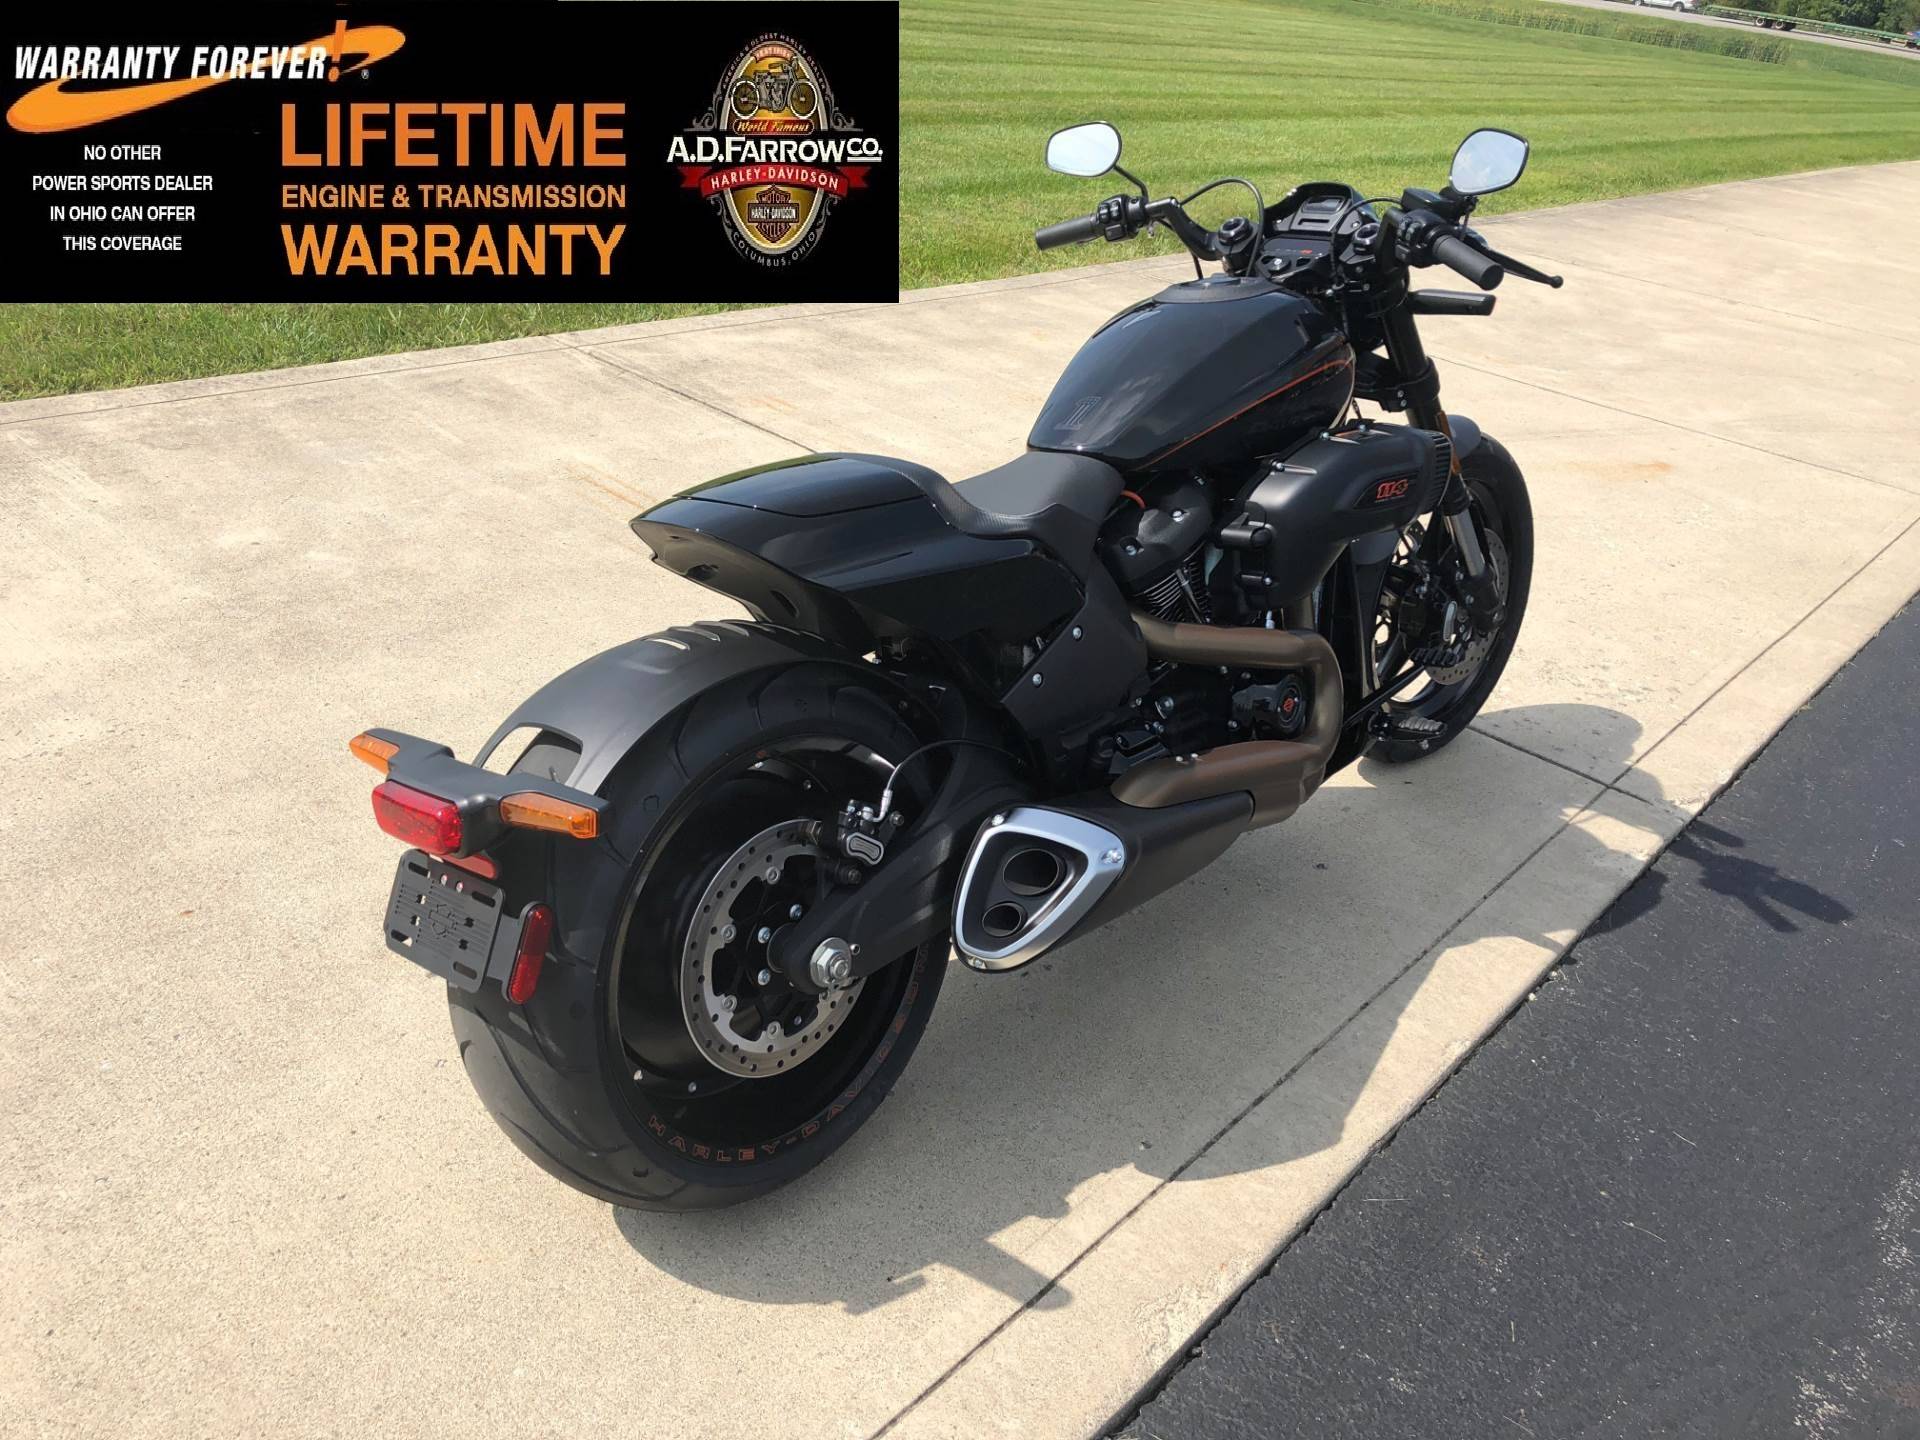 New 2019 Harley Davidson FXDR 114 Motorcycles in 